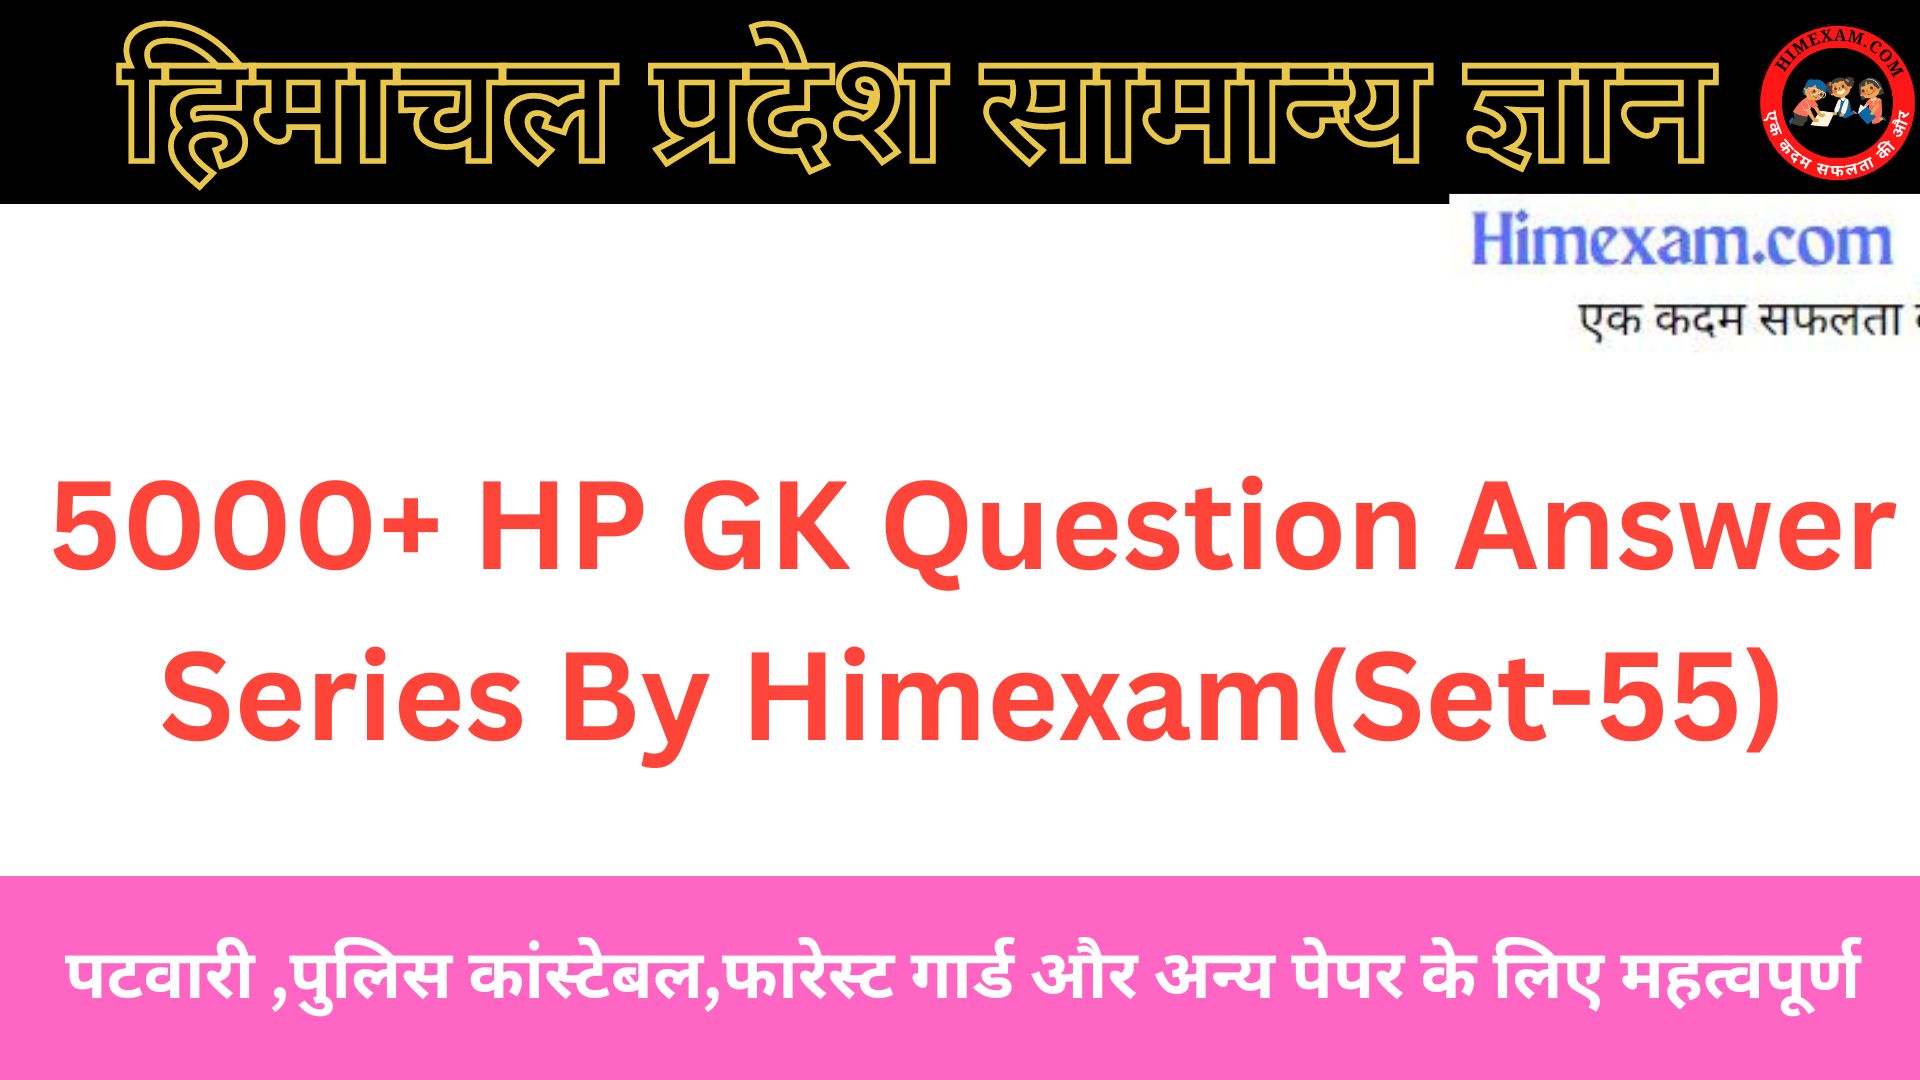 5000+ HP GK Question Answer Series By Himexam(Set-55)